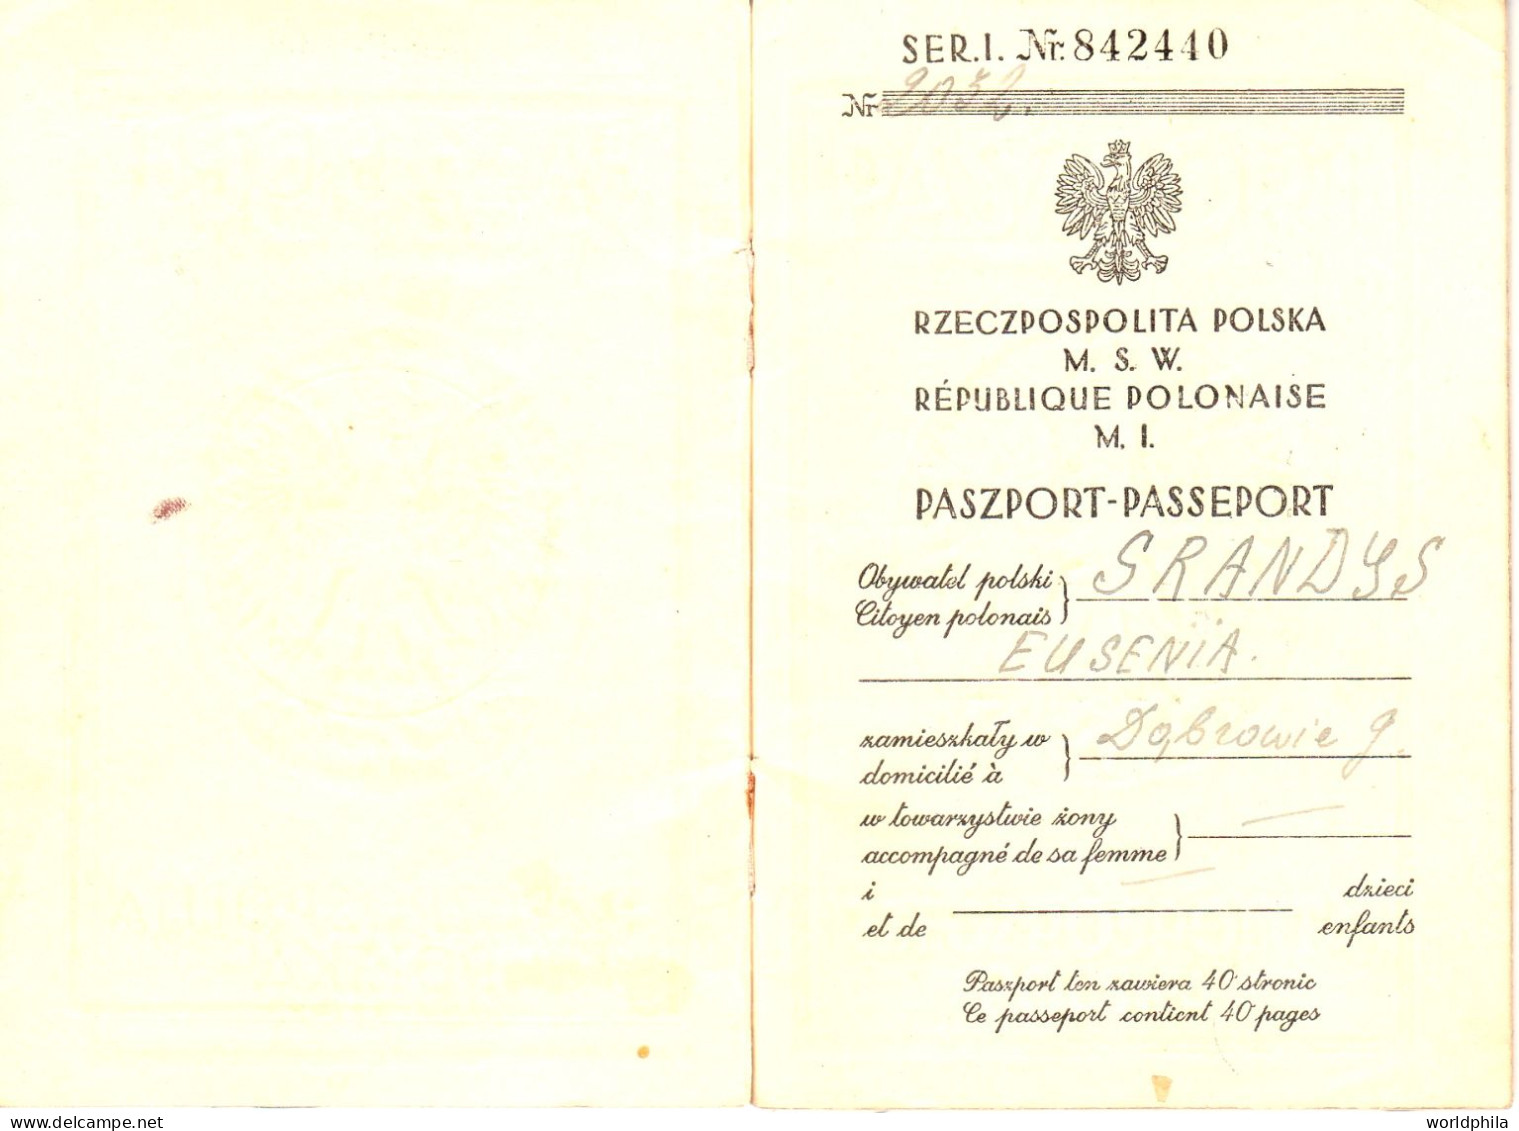 Poland / Polska 1937-9 much travelled document, Europe, some revenue stamps. signed Passport History document